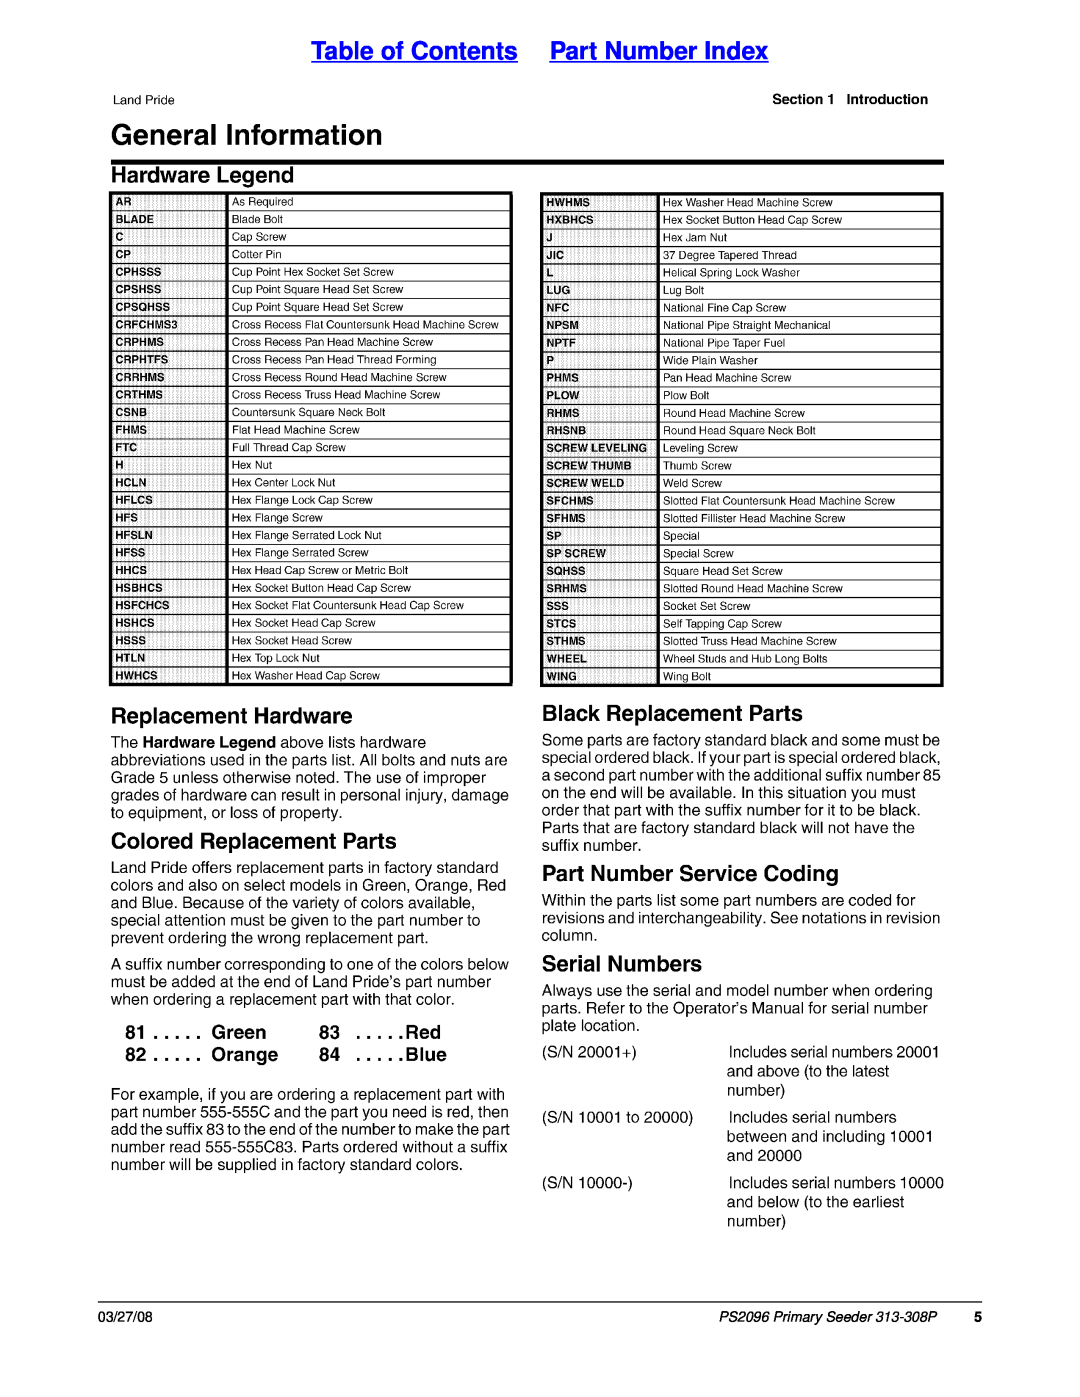 Land Pride manual Table of Contents Part Number Index, PS2096 Primary Seeder 313-308P, 03/27/08 